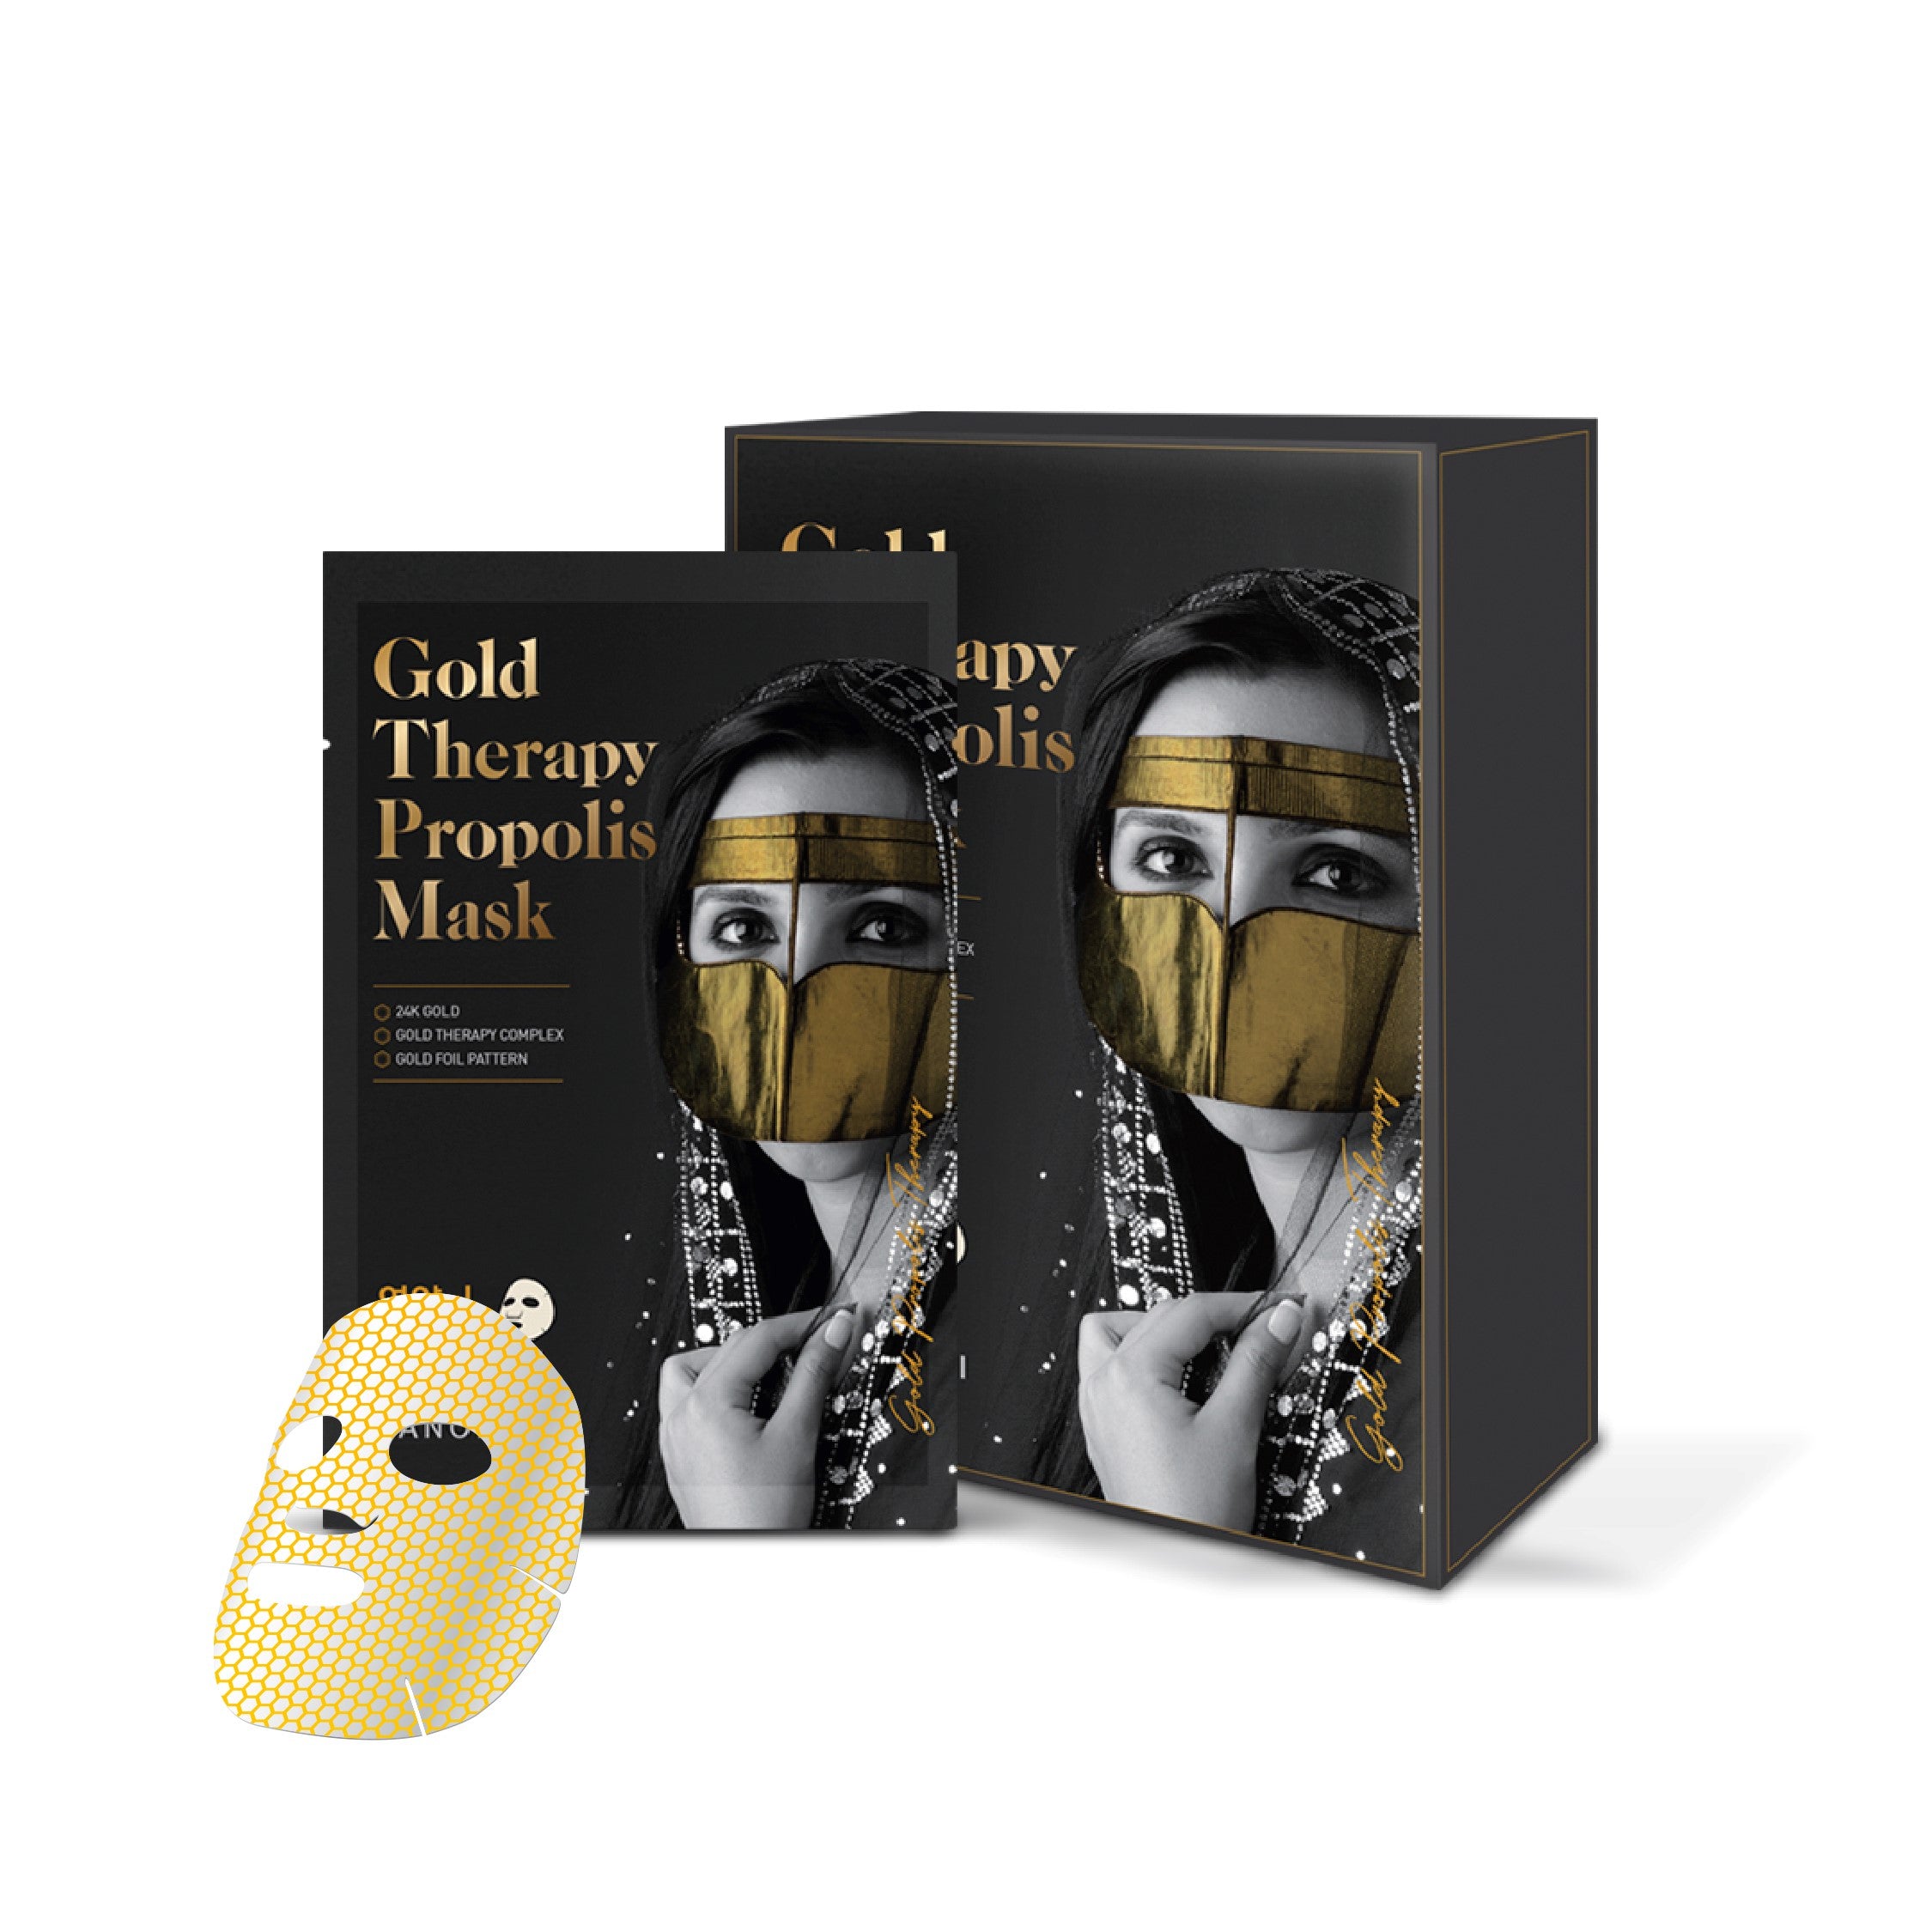 Gold Therapy Propolis Mask